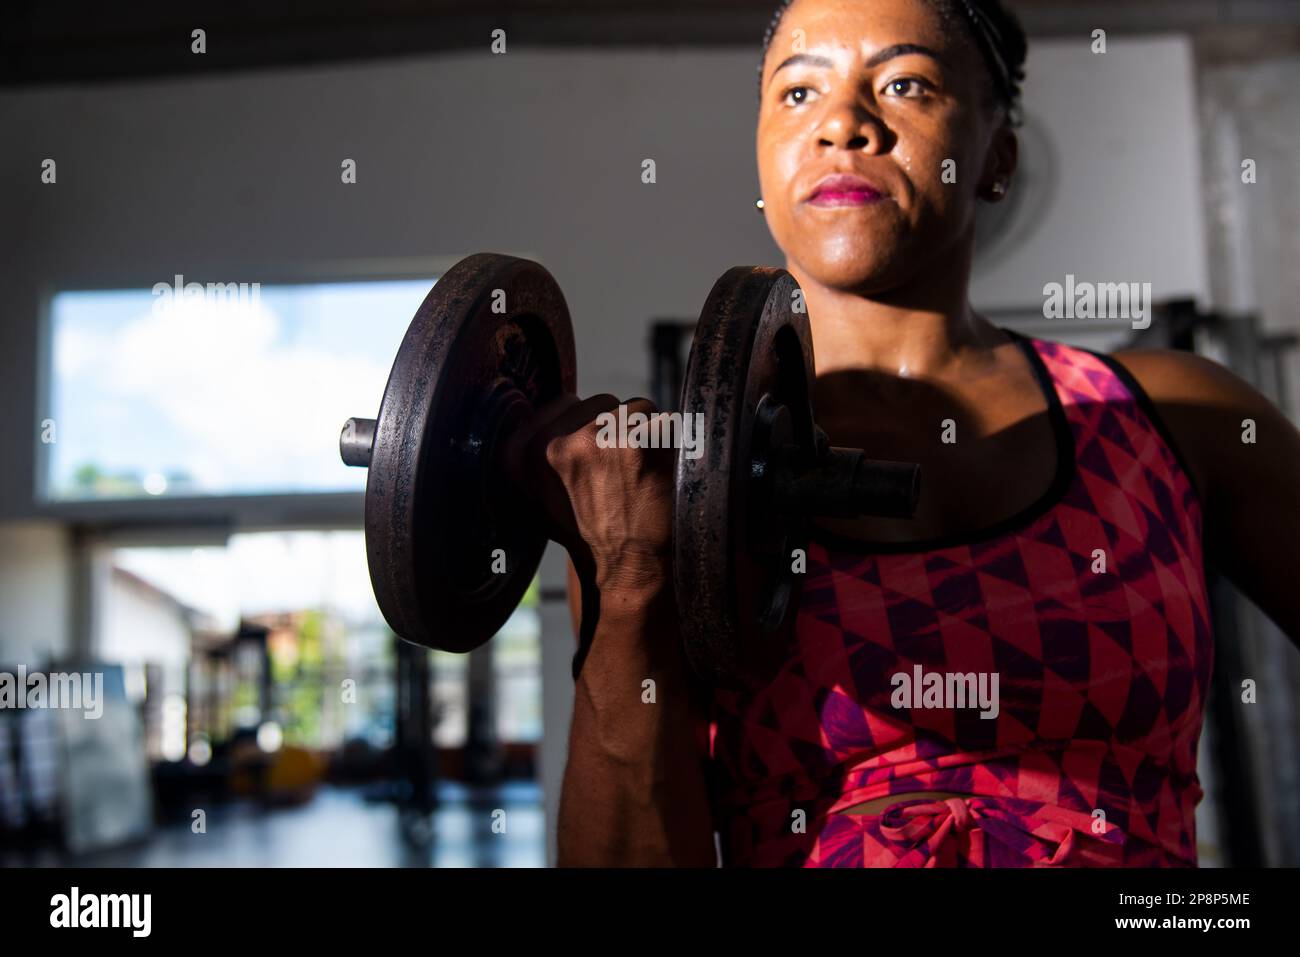 Dramatic portrait of fitness woman doing exercise for arm muscle. Gym training. Stock Photo